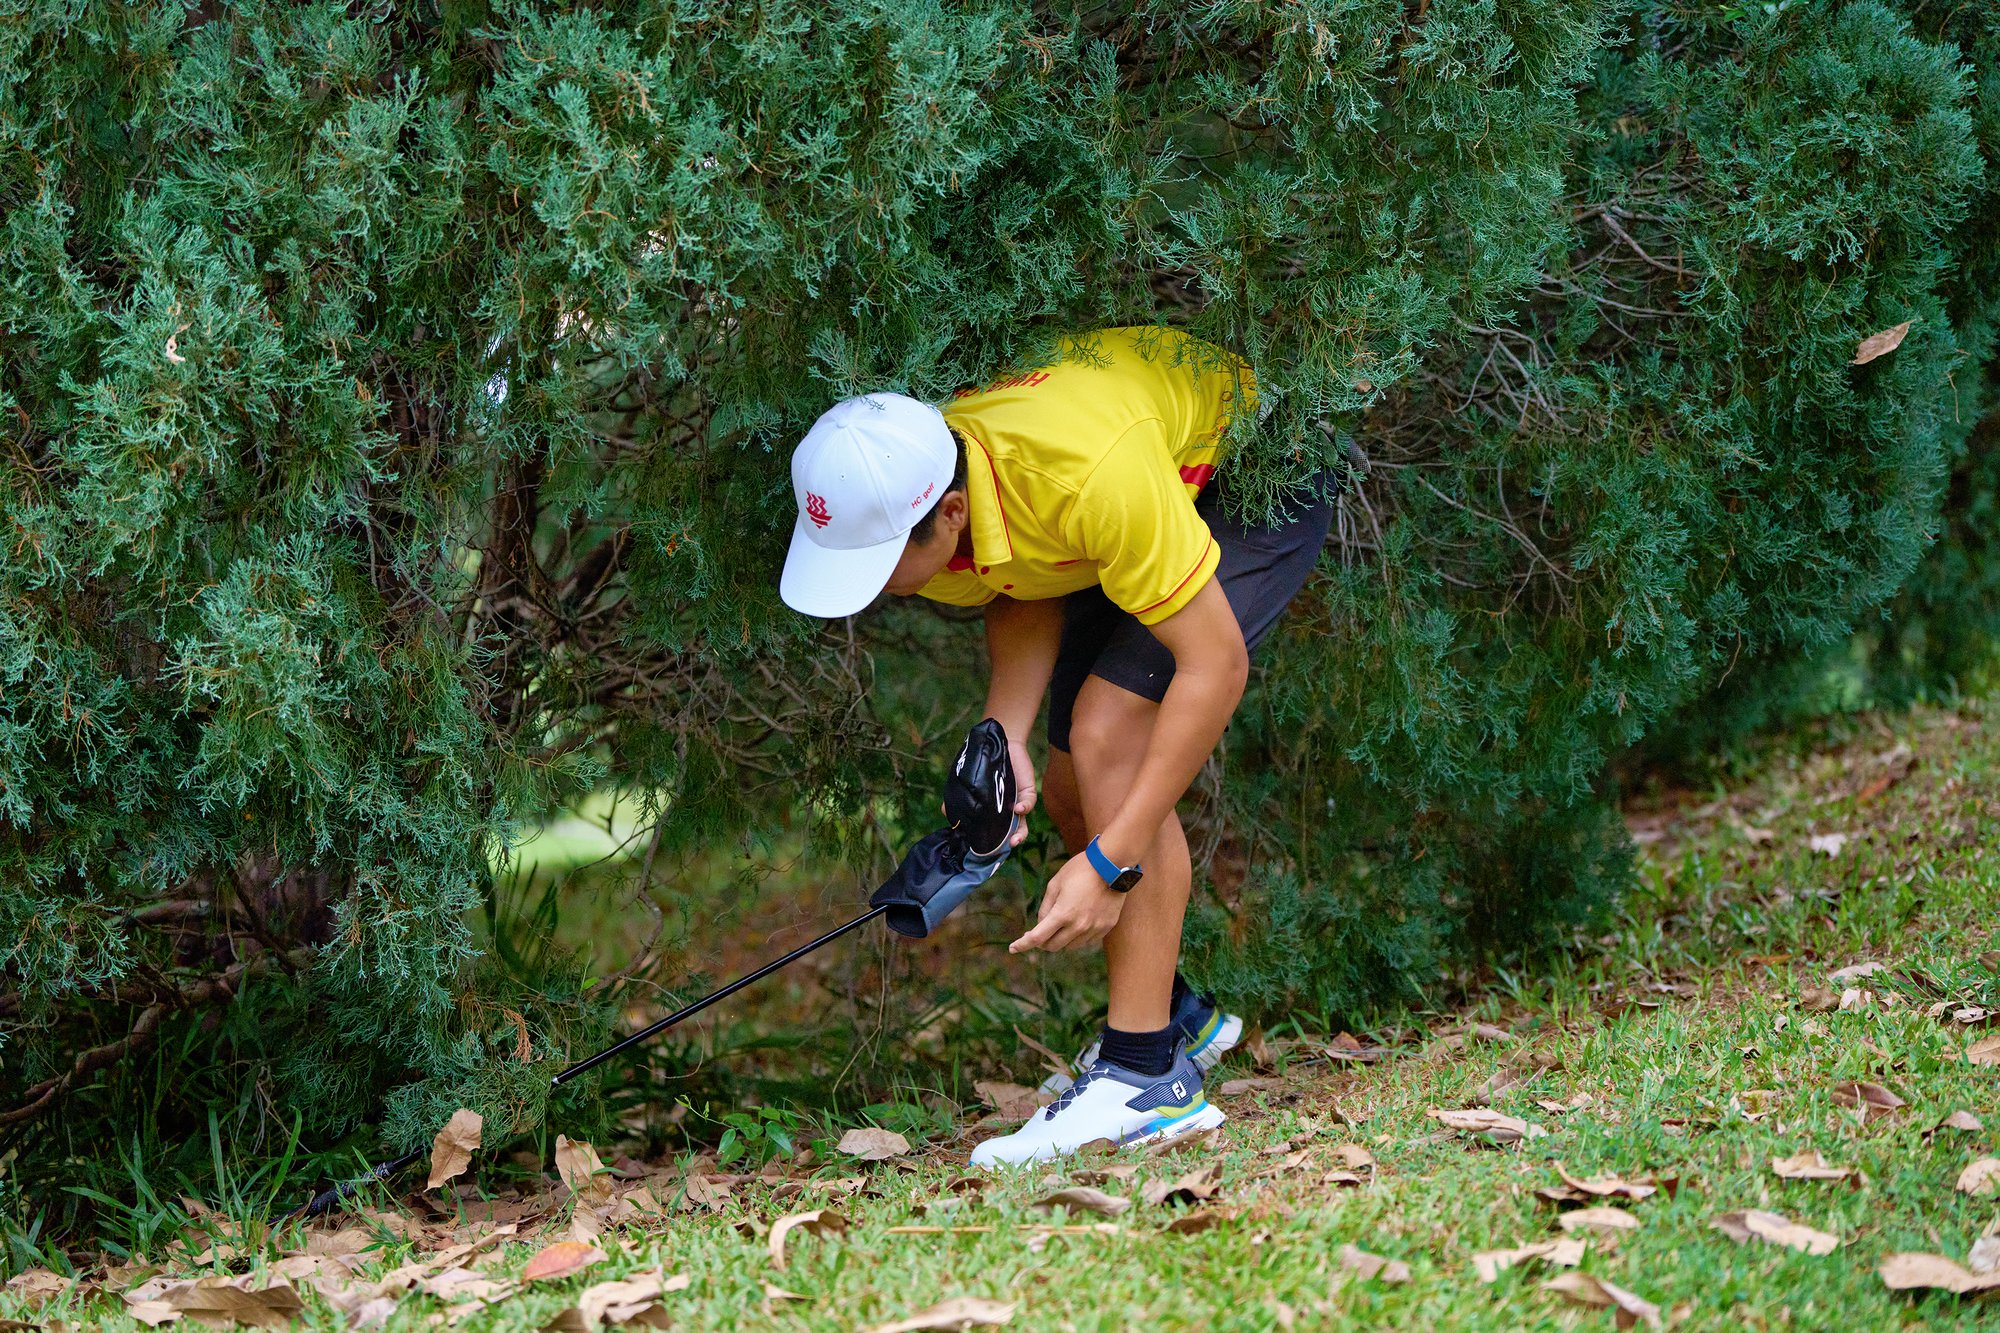 2024-04-15_NSG Golf Championship Master Course @Laguna Nationals_Photo by Eric Koh DSC06597 Sean  Pang(HCI) searches for his golf ball under the tree